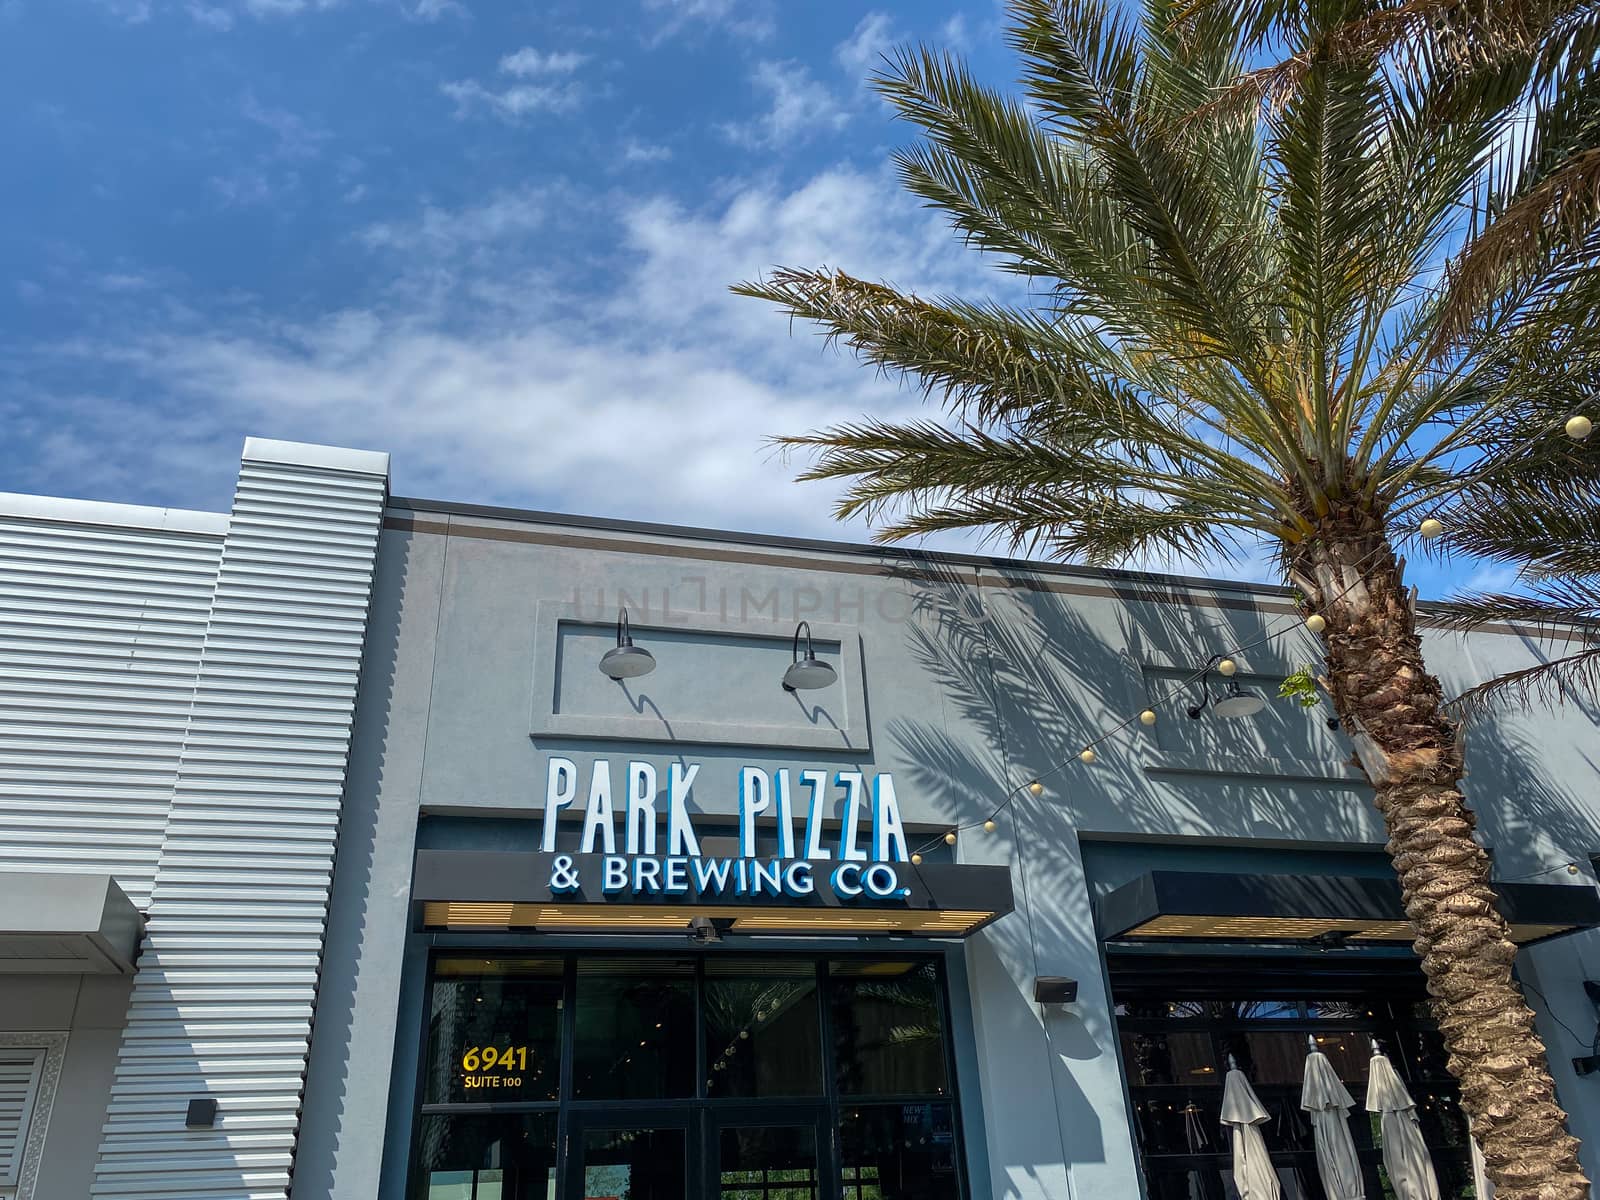 Orlando, FL/USA-4/11/20: The exterior of Park Place Pizza Restaurant in Laureate Park at Lake Nona in Orlando, FL USA.